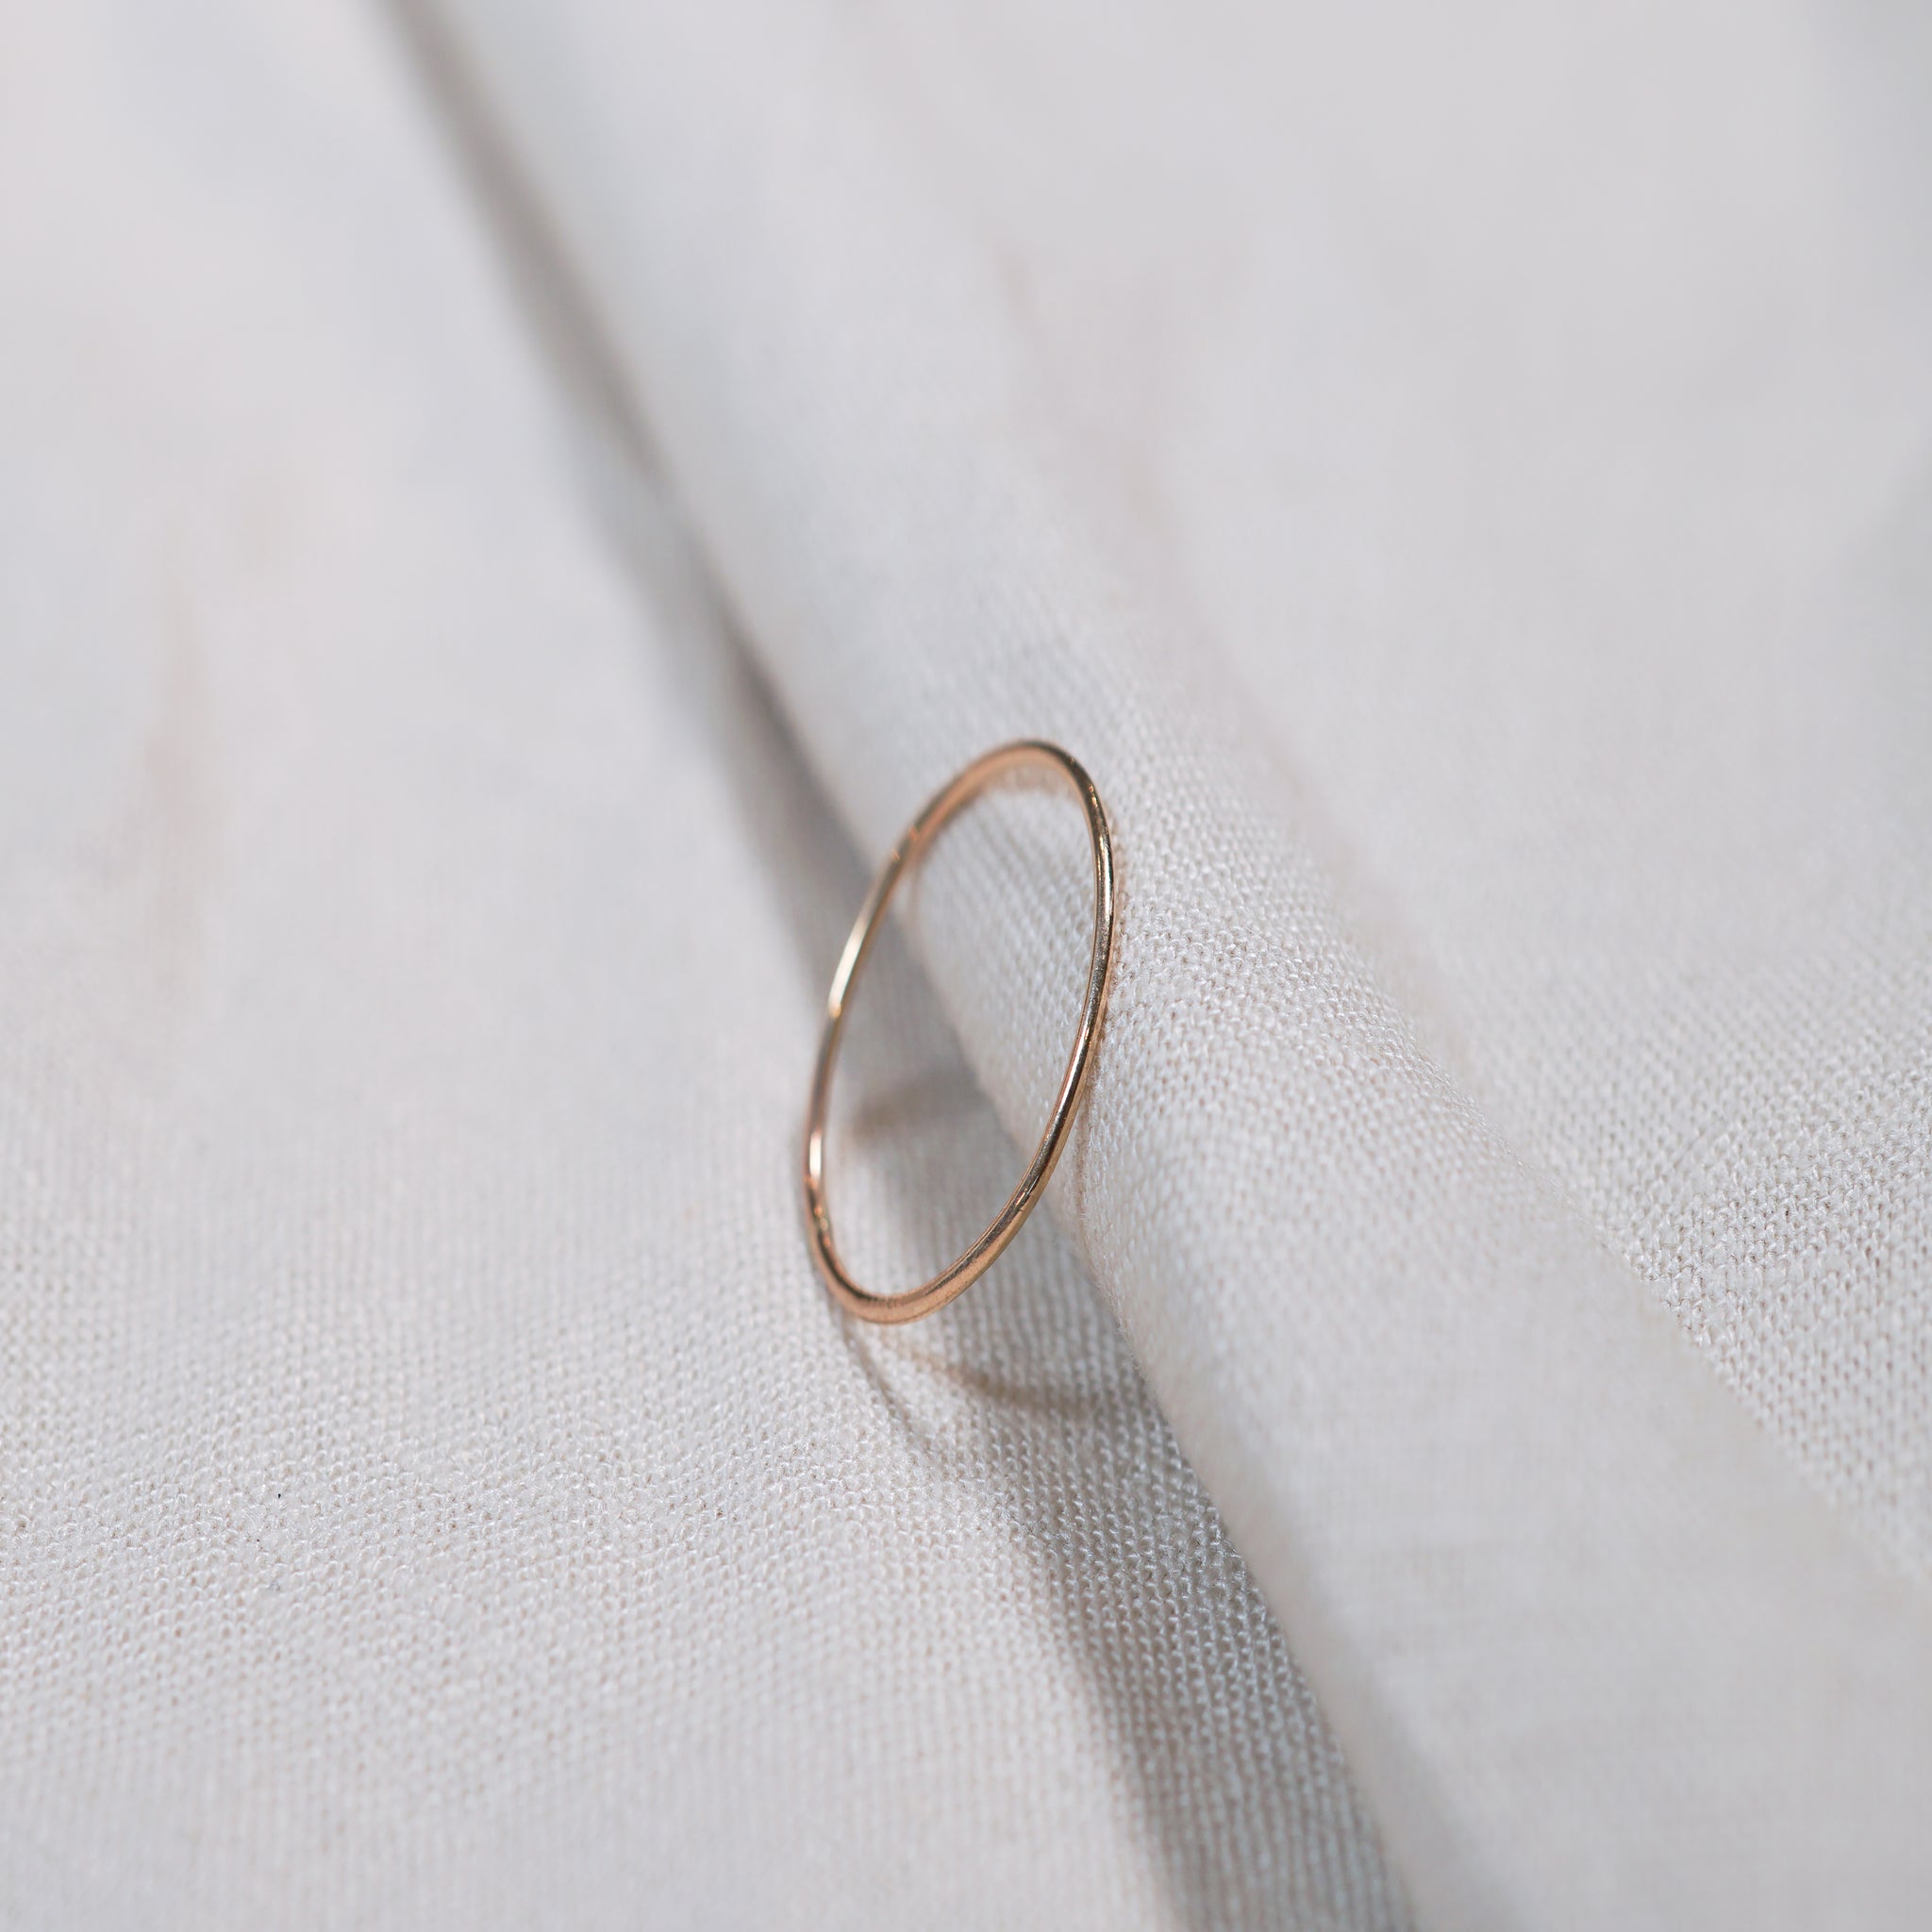 The Whisper Thin Smooth Ring